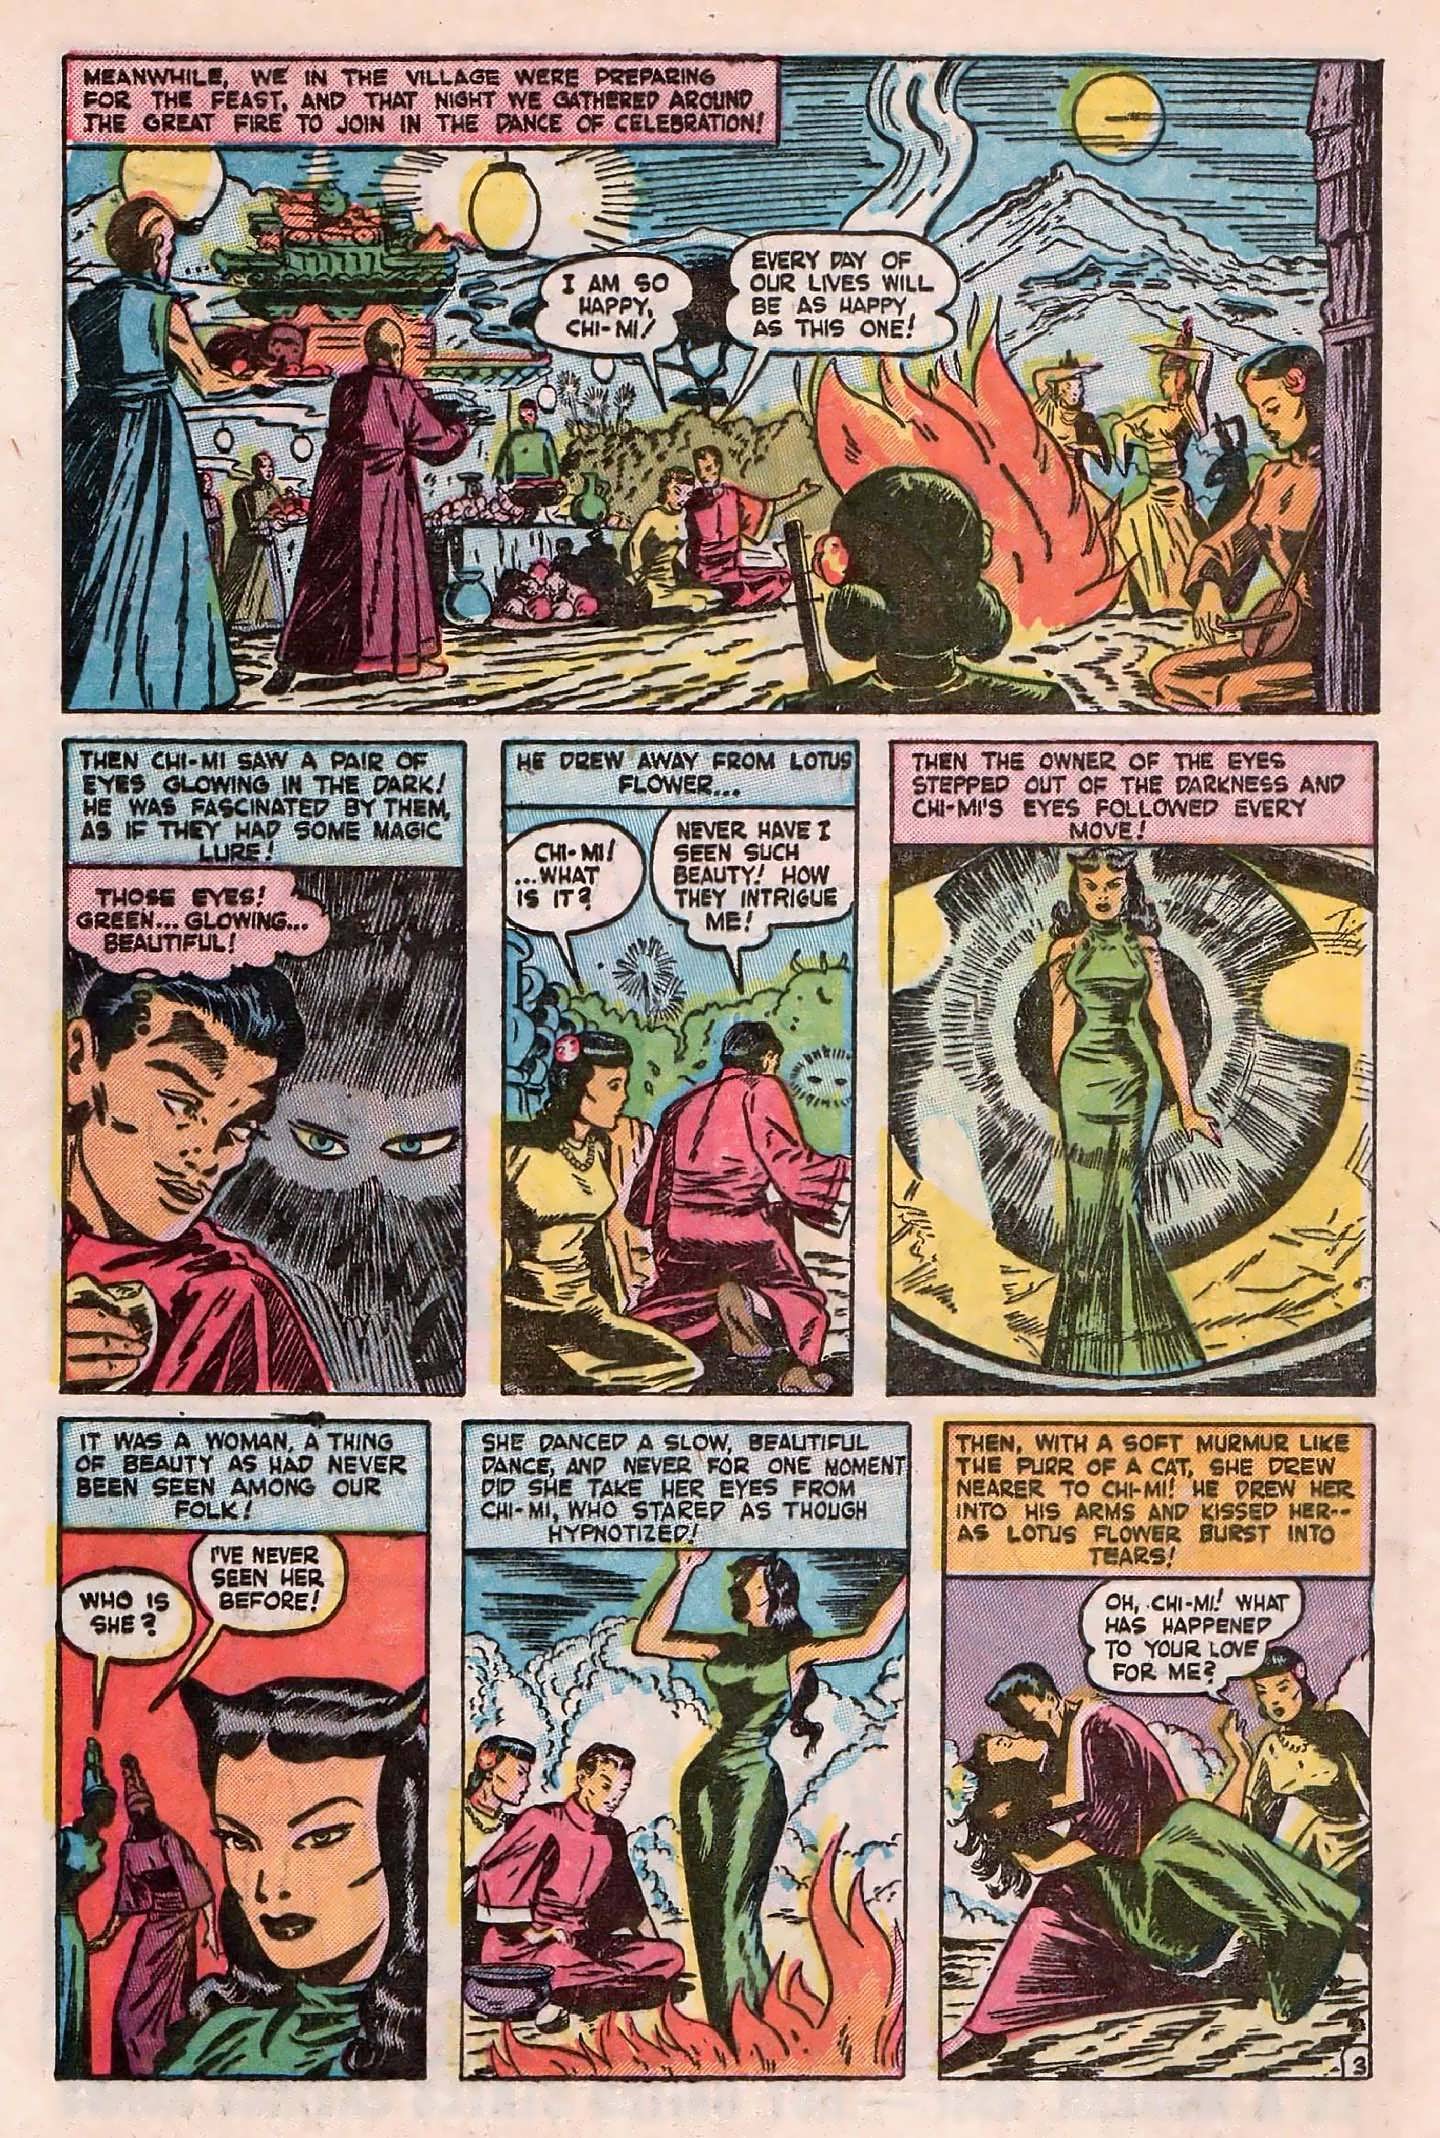 Marvel Tales (1949) 93 Page 33